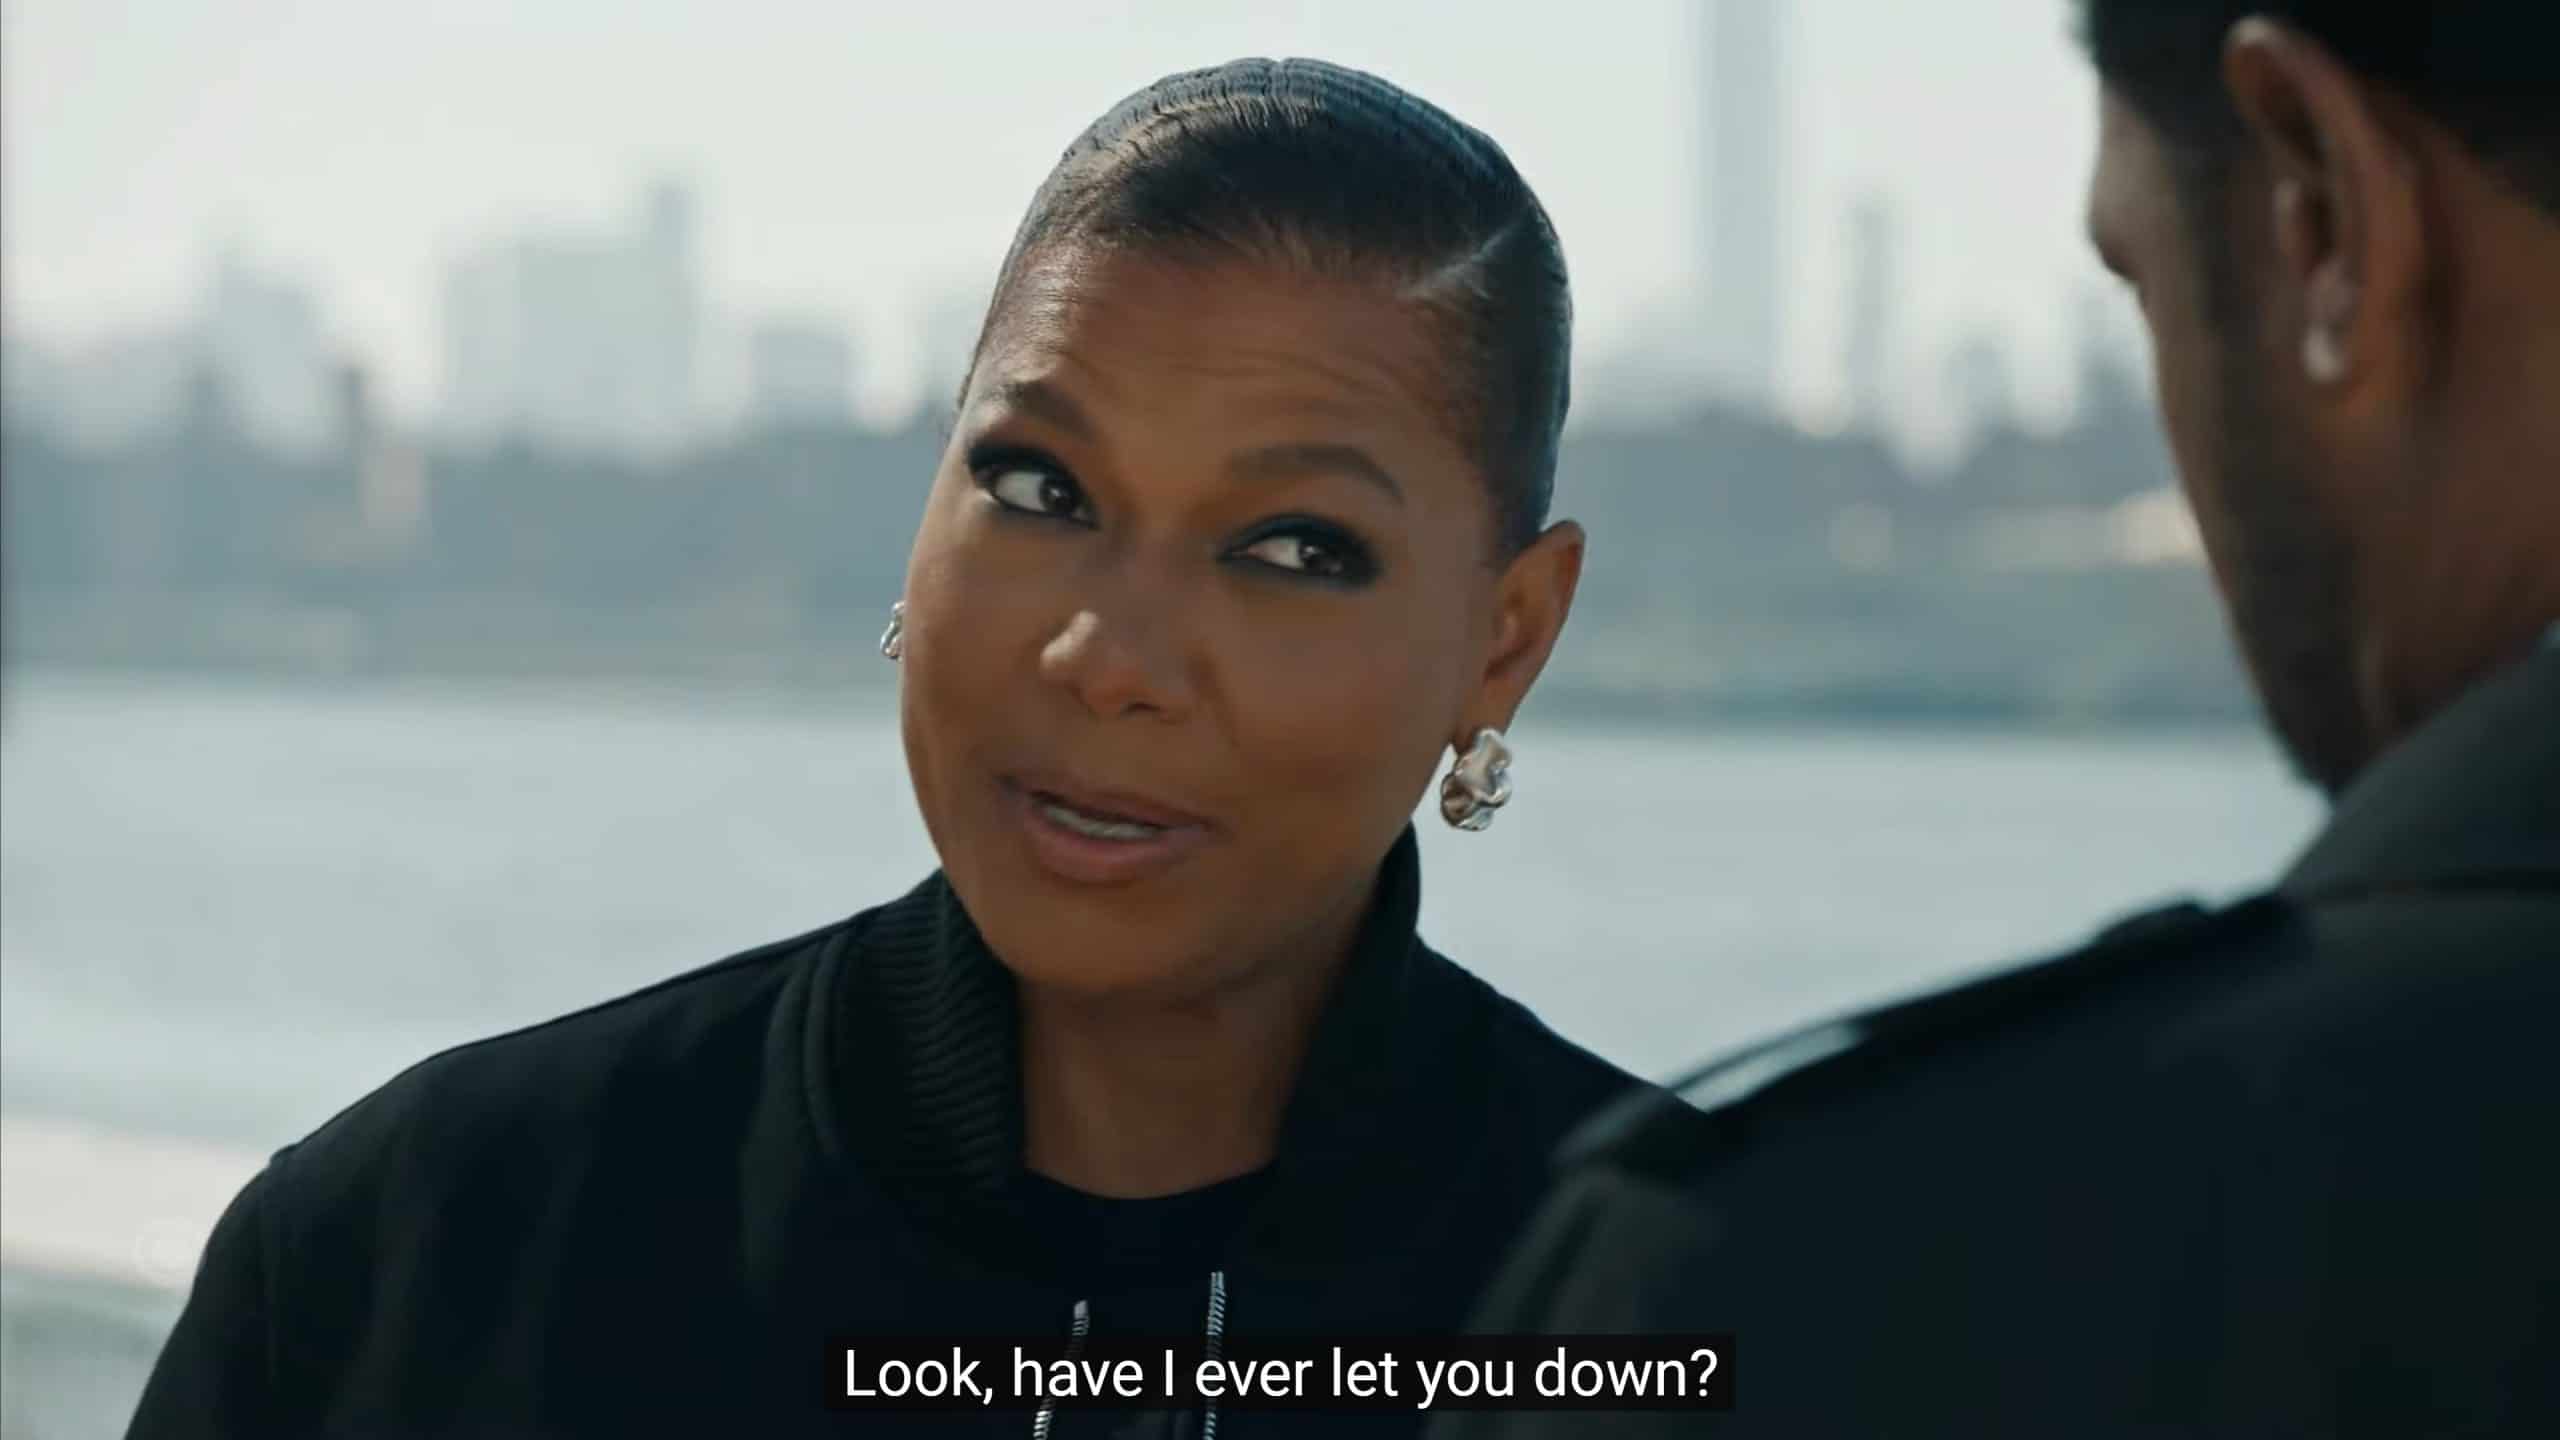 Queen Latifah as Robyn trying to reassure Dante